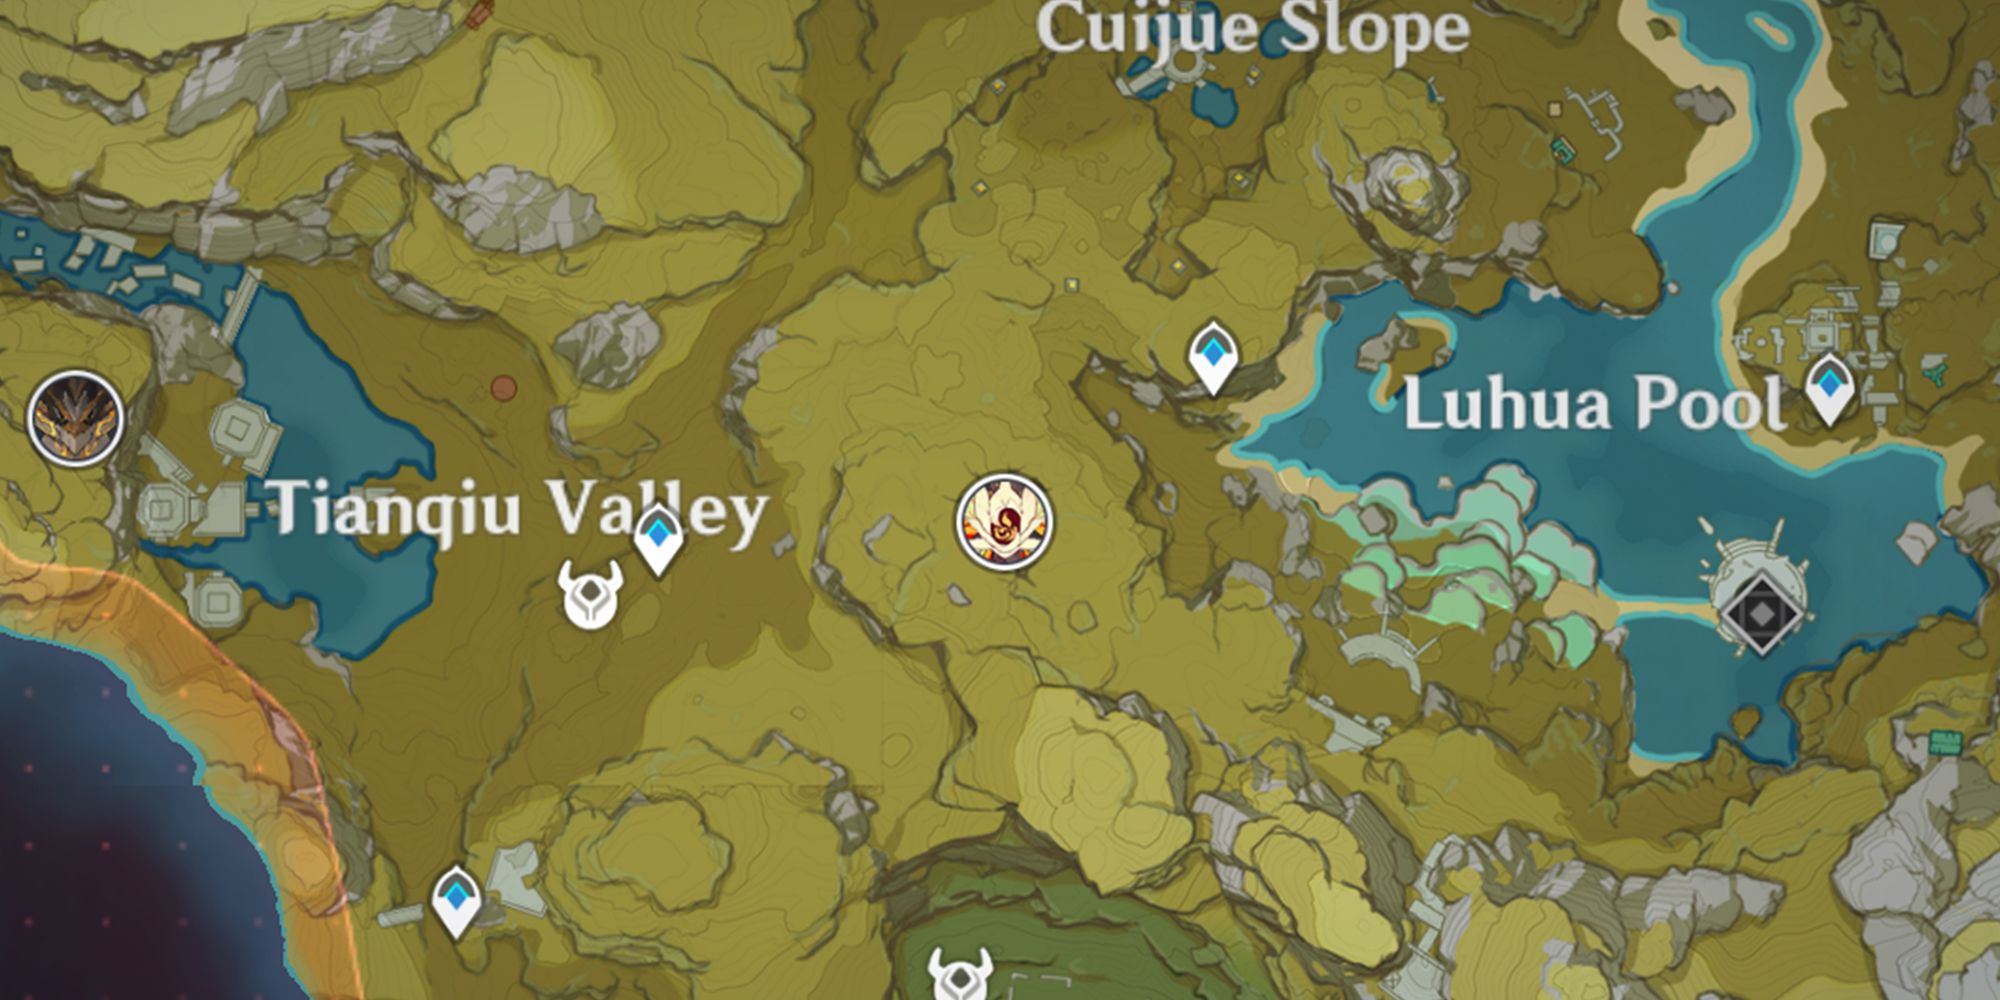 Genshin Impact: Pyro Regisvine is seen on the in-game map in an area of Liyue